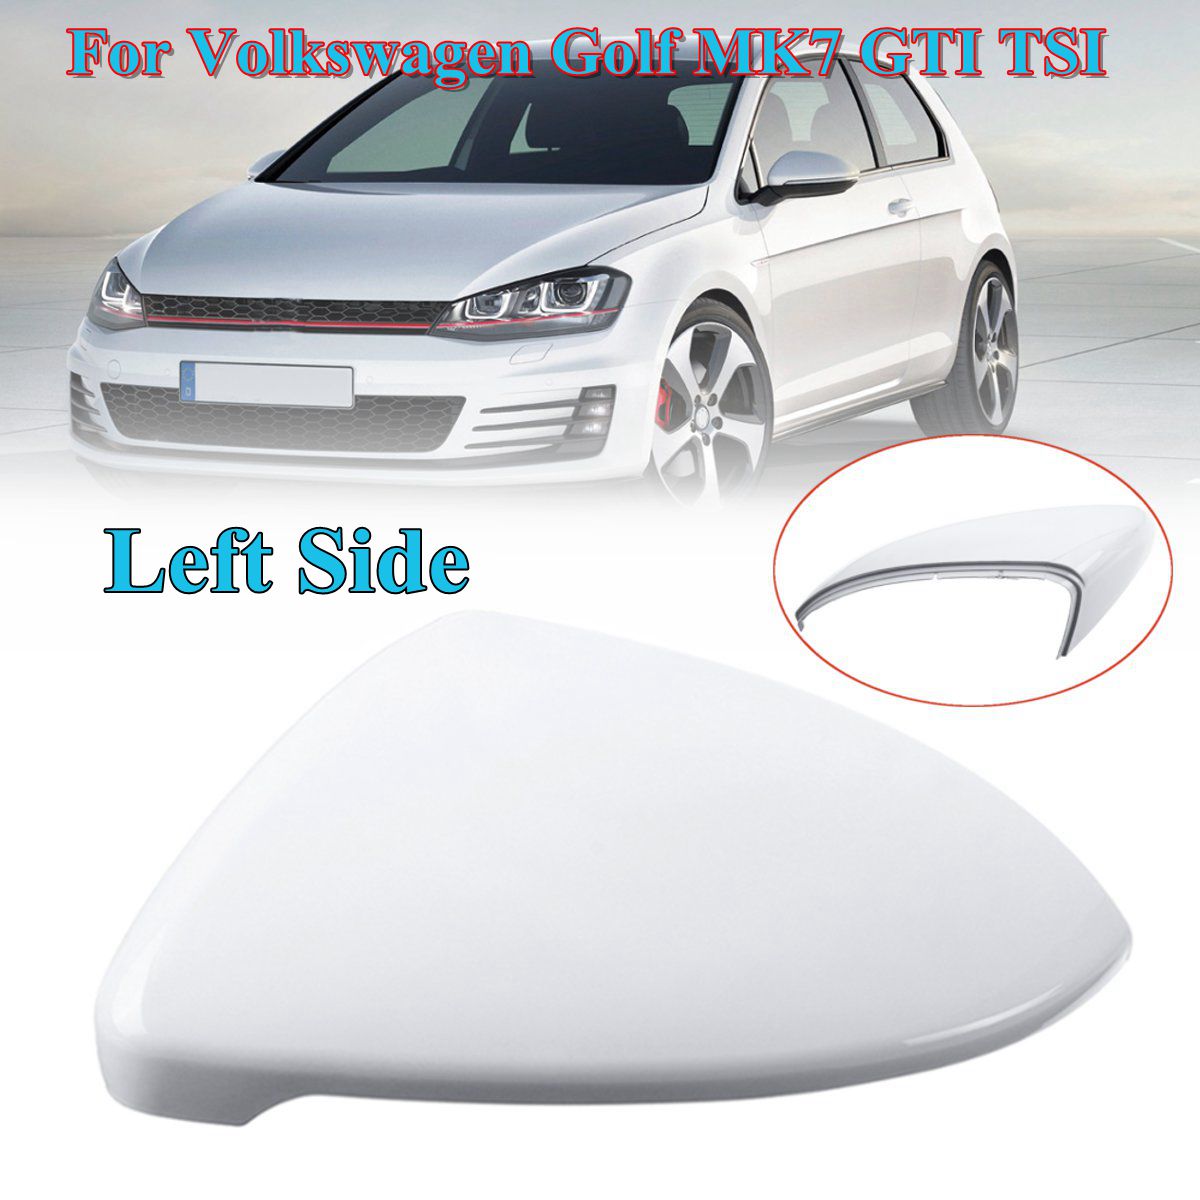 VW Golf MK7 Golf 7 GTI TSI 2014-2018 Front Left White Rearview Side Wing Mirror Cap Cover